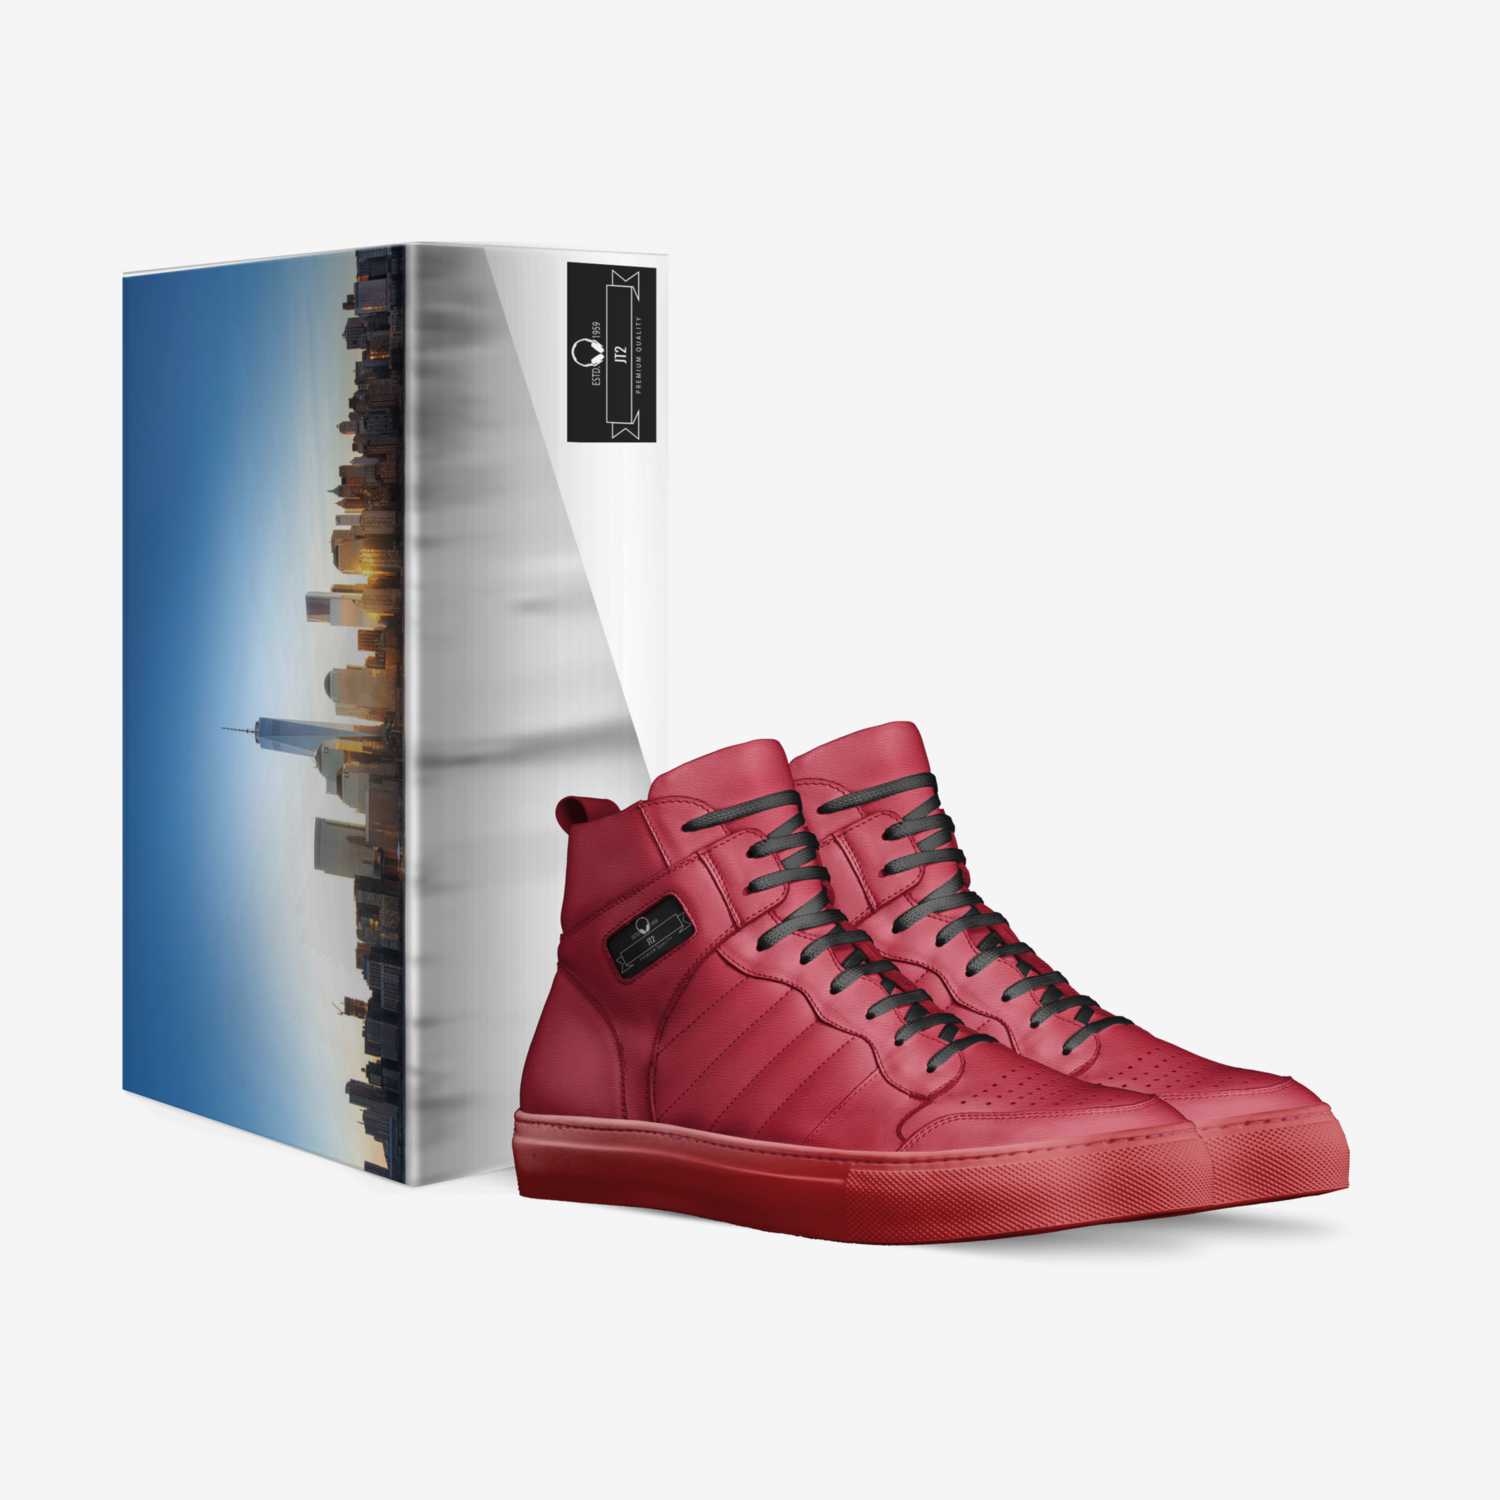 jt2 custom made in Italy shoes by Jt | Box view